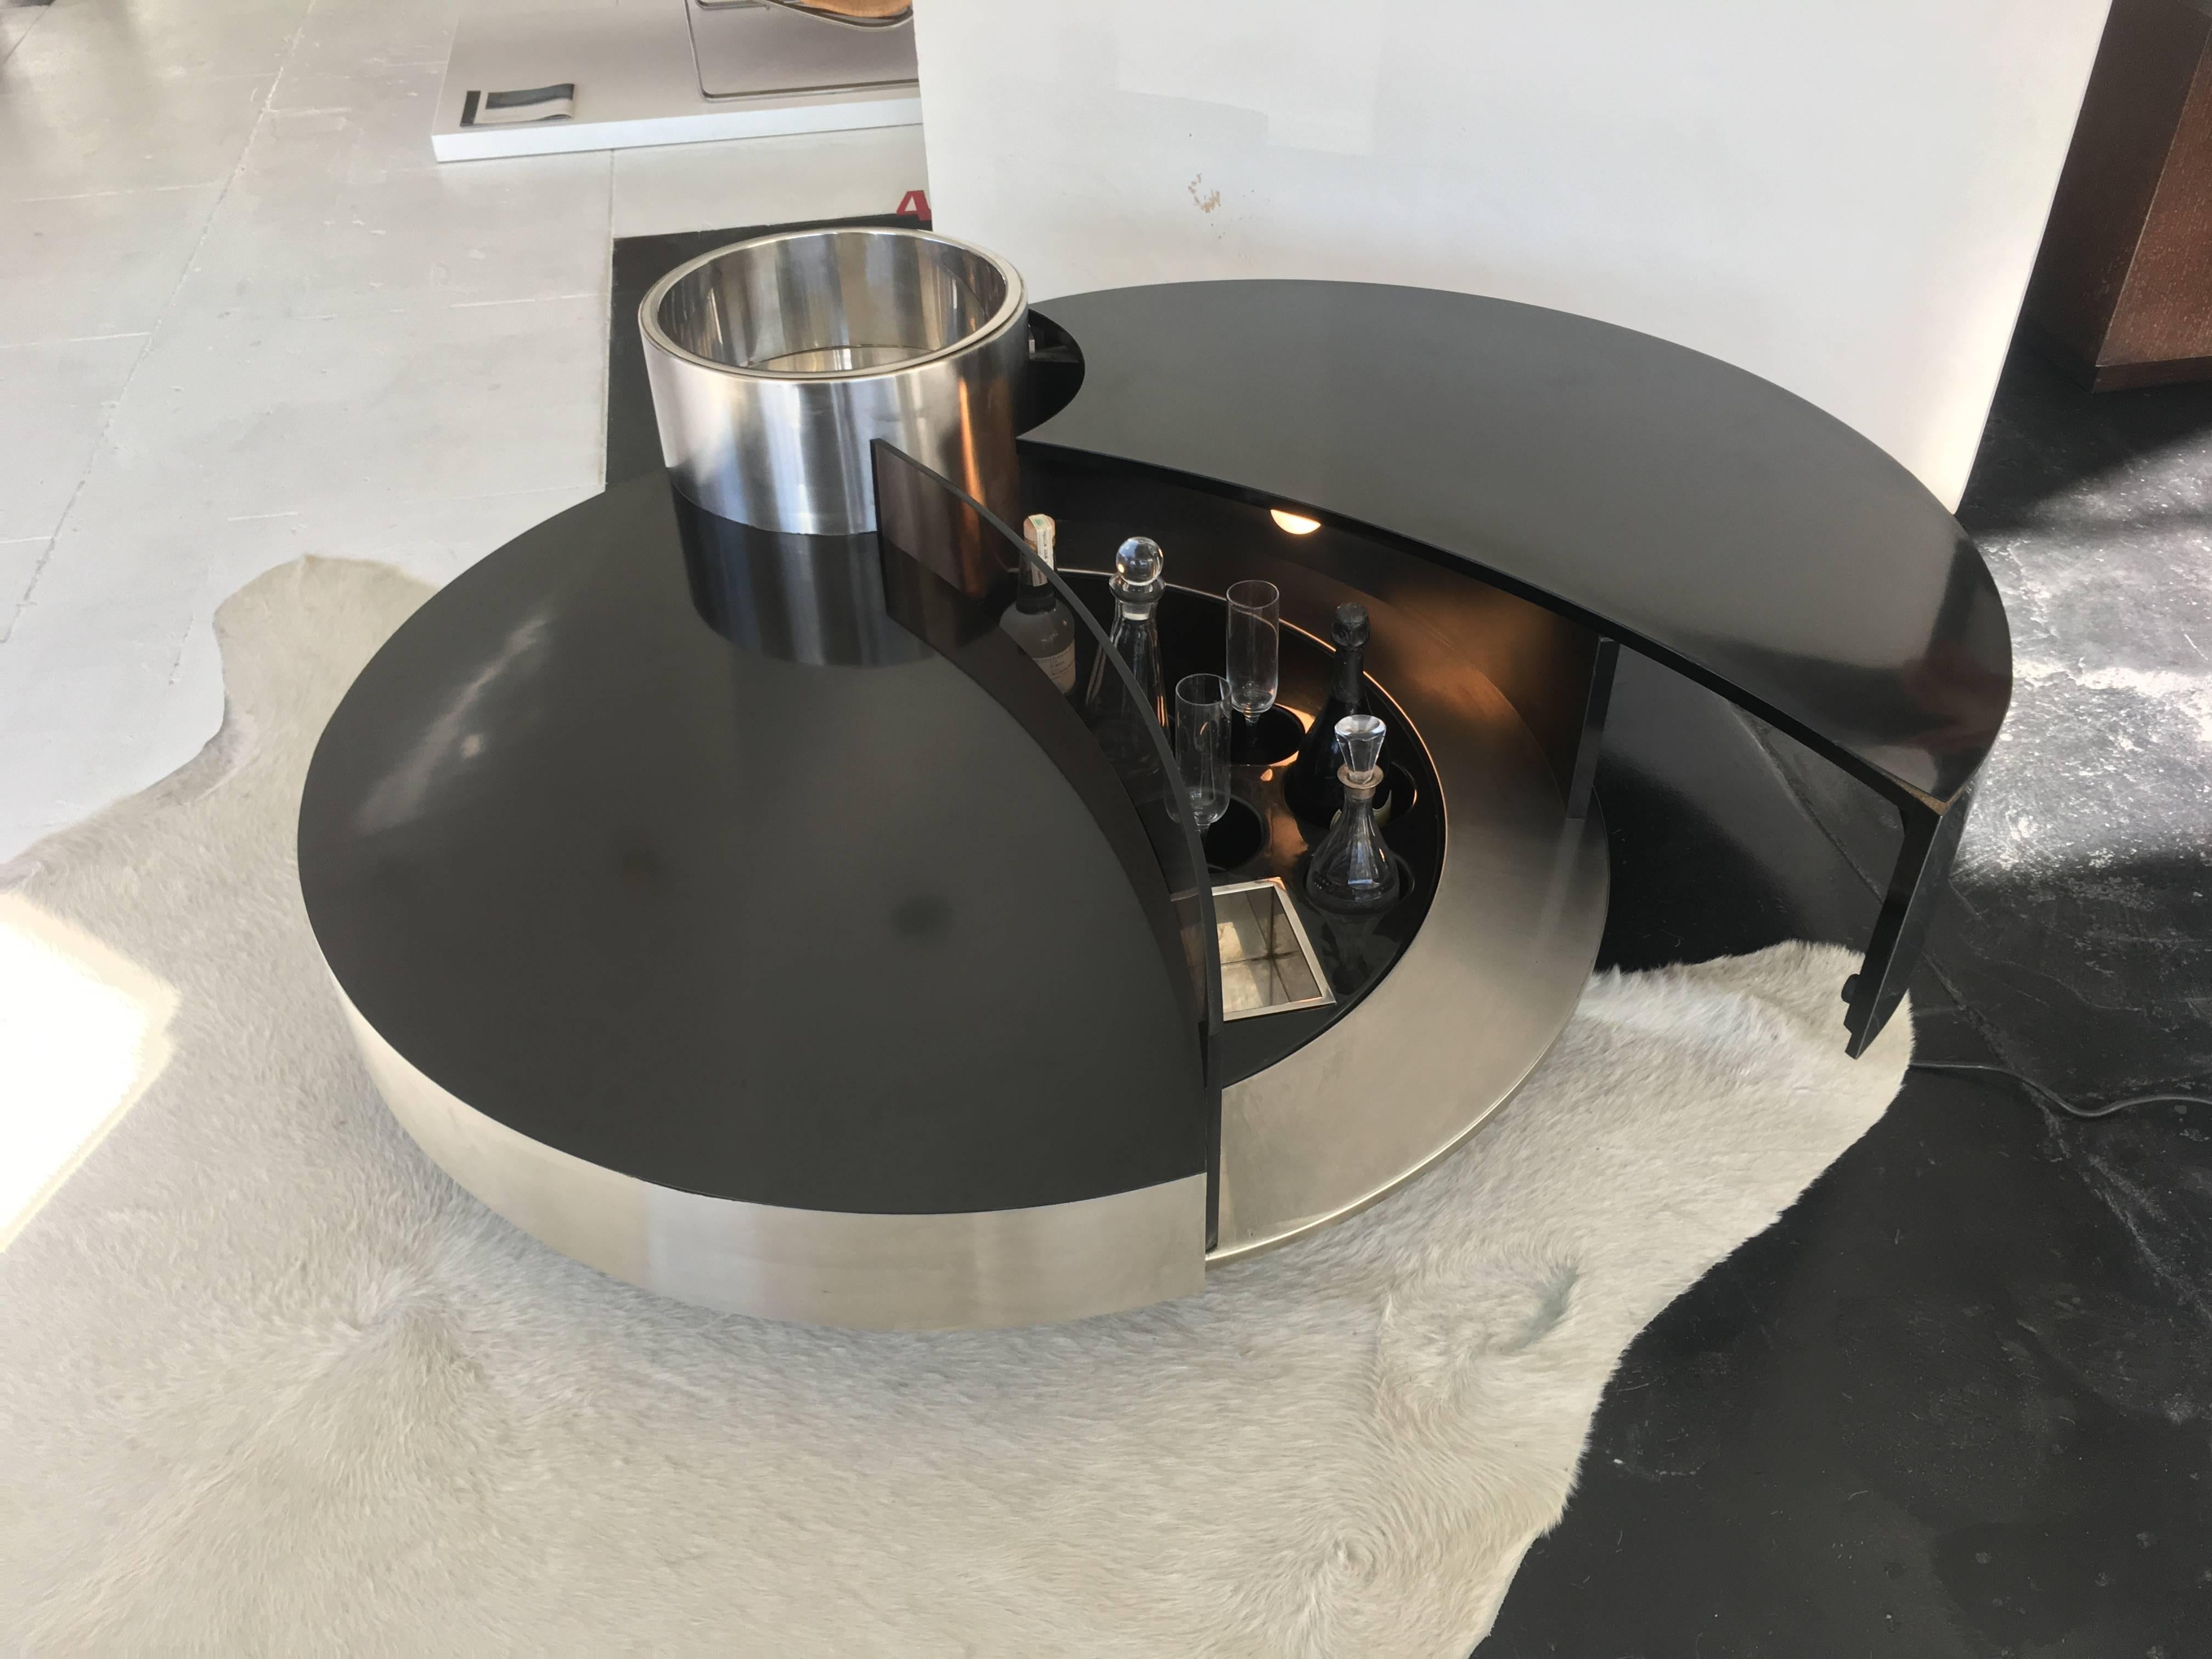 Incredible and unique bar table by Willy Rizzo, 1970s. Illuminated bar table, stainless steel, brushed aluminium, plastic and black laminate, opening to a fitted bar interior. Excellent condition.